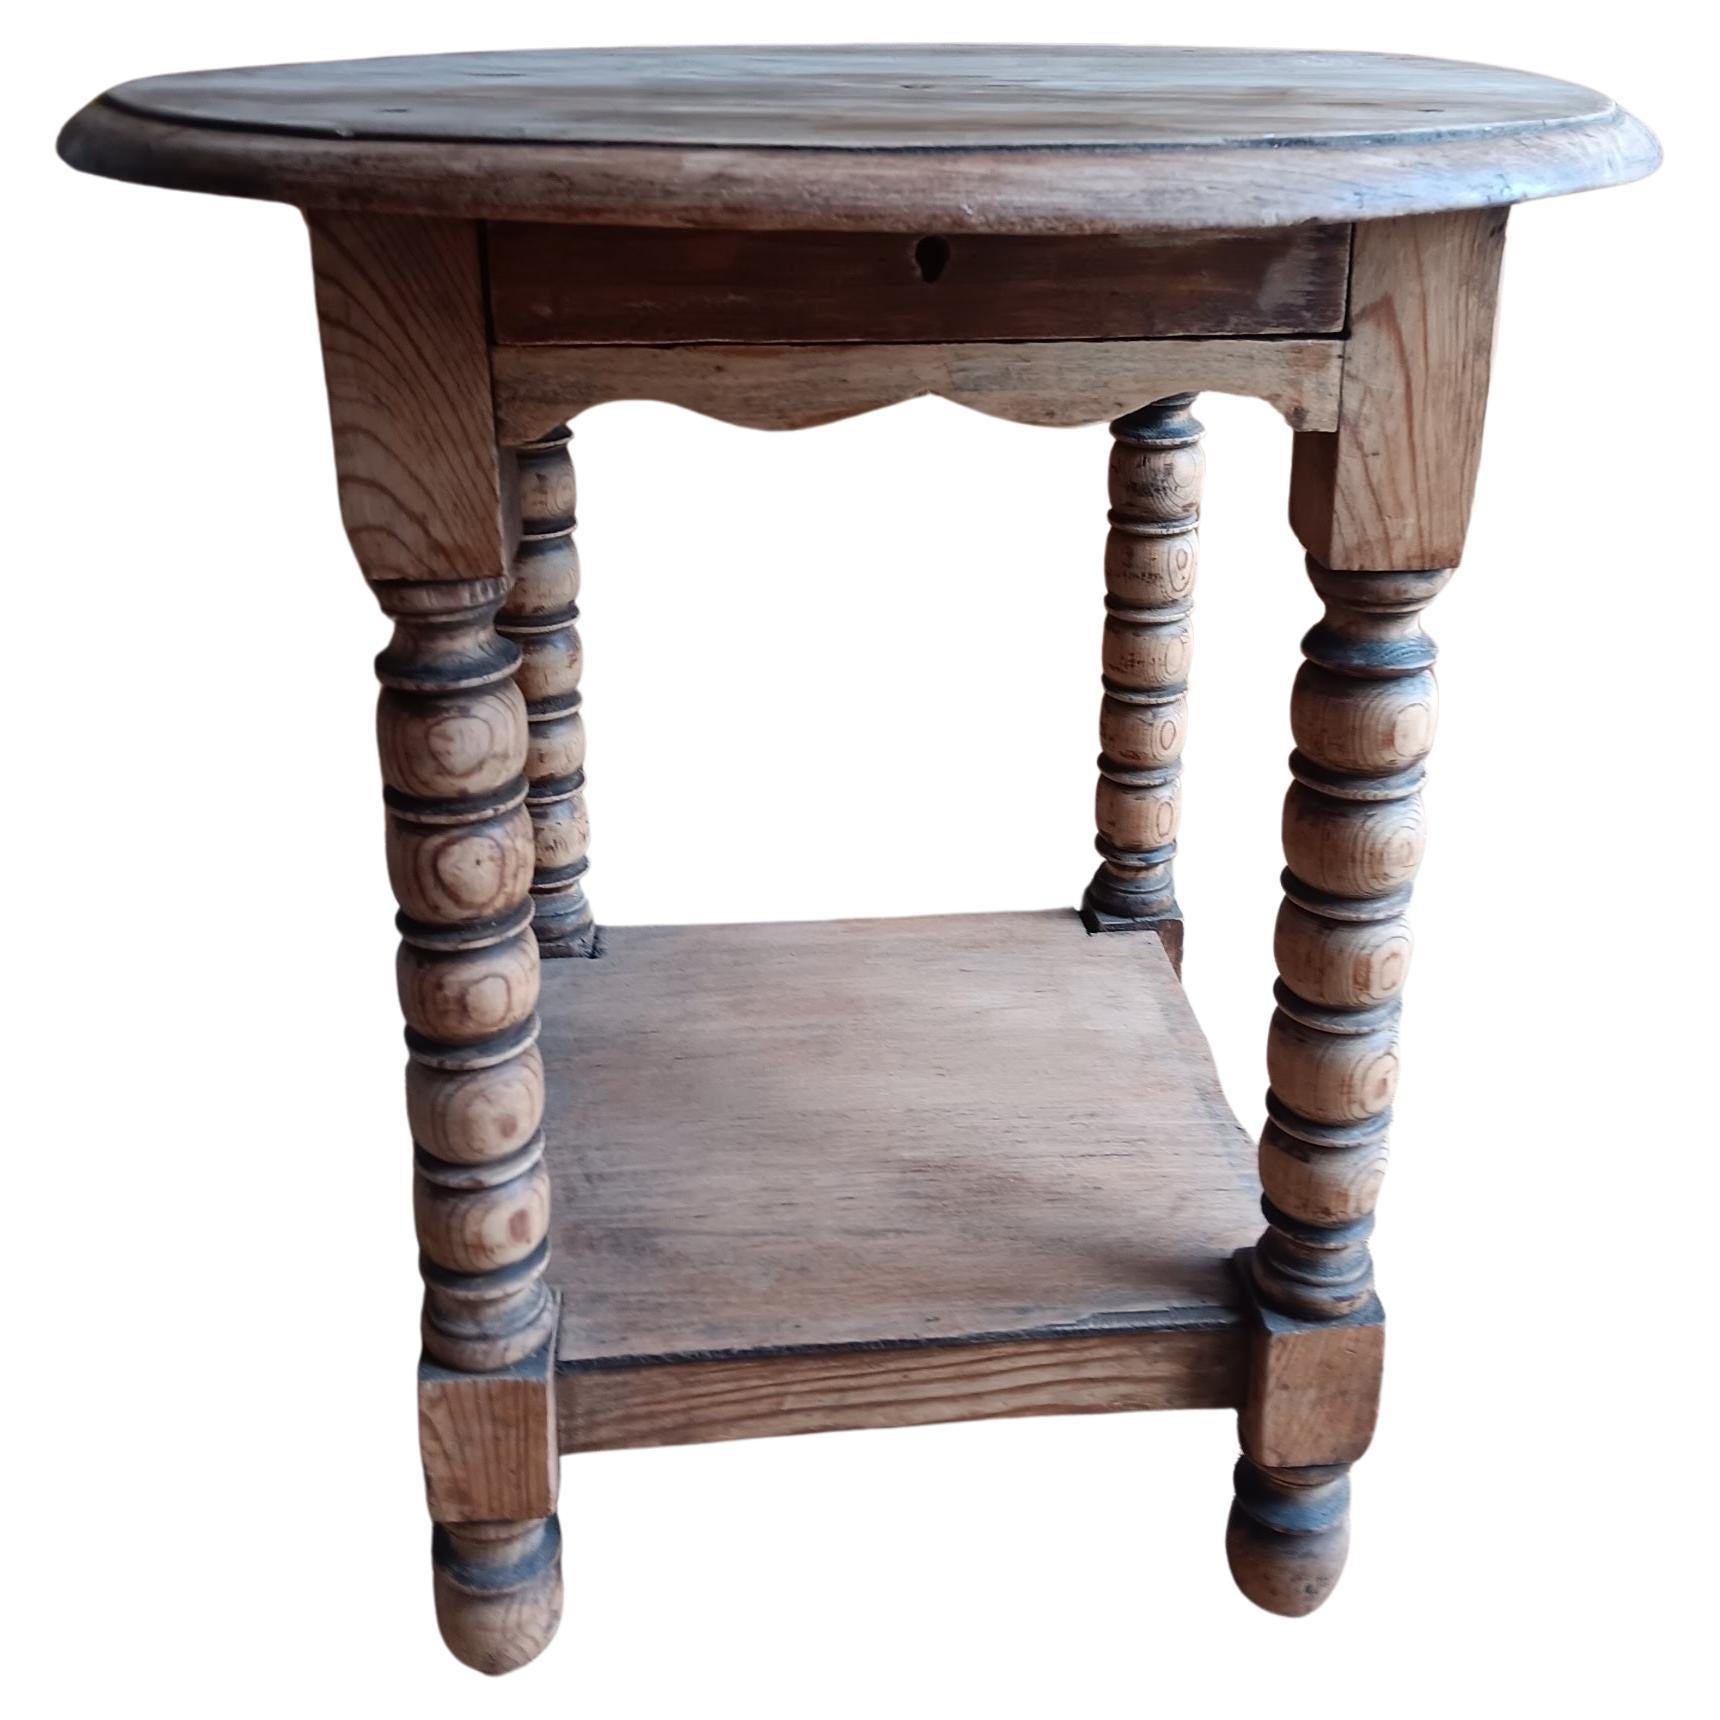 This table is raised on a base composed of four bobbin turned Legs and a optogonal star stretcher, also turned.

Oval antique wine or side table of the 19th century. Wood with bobbin turned Legs.







